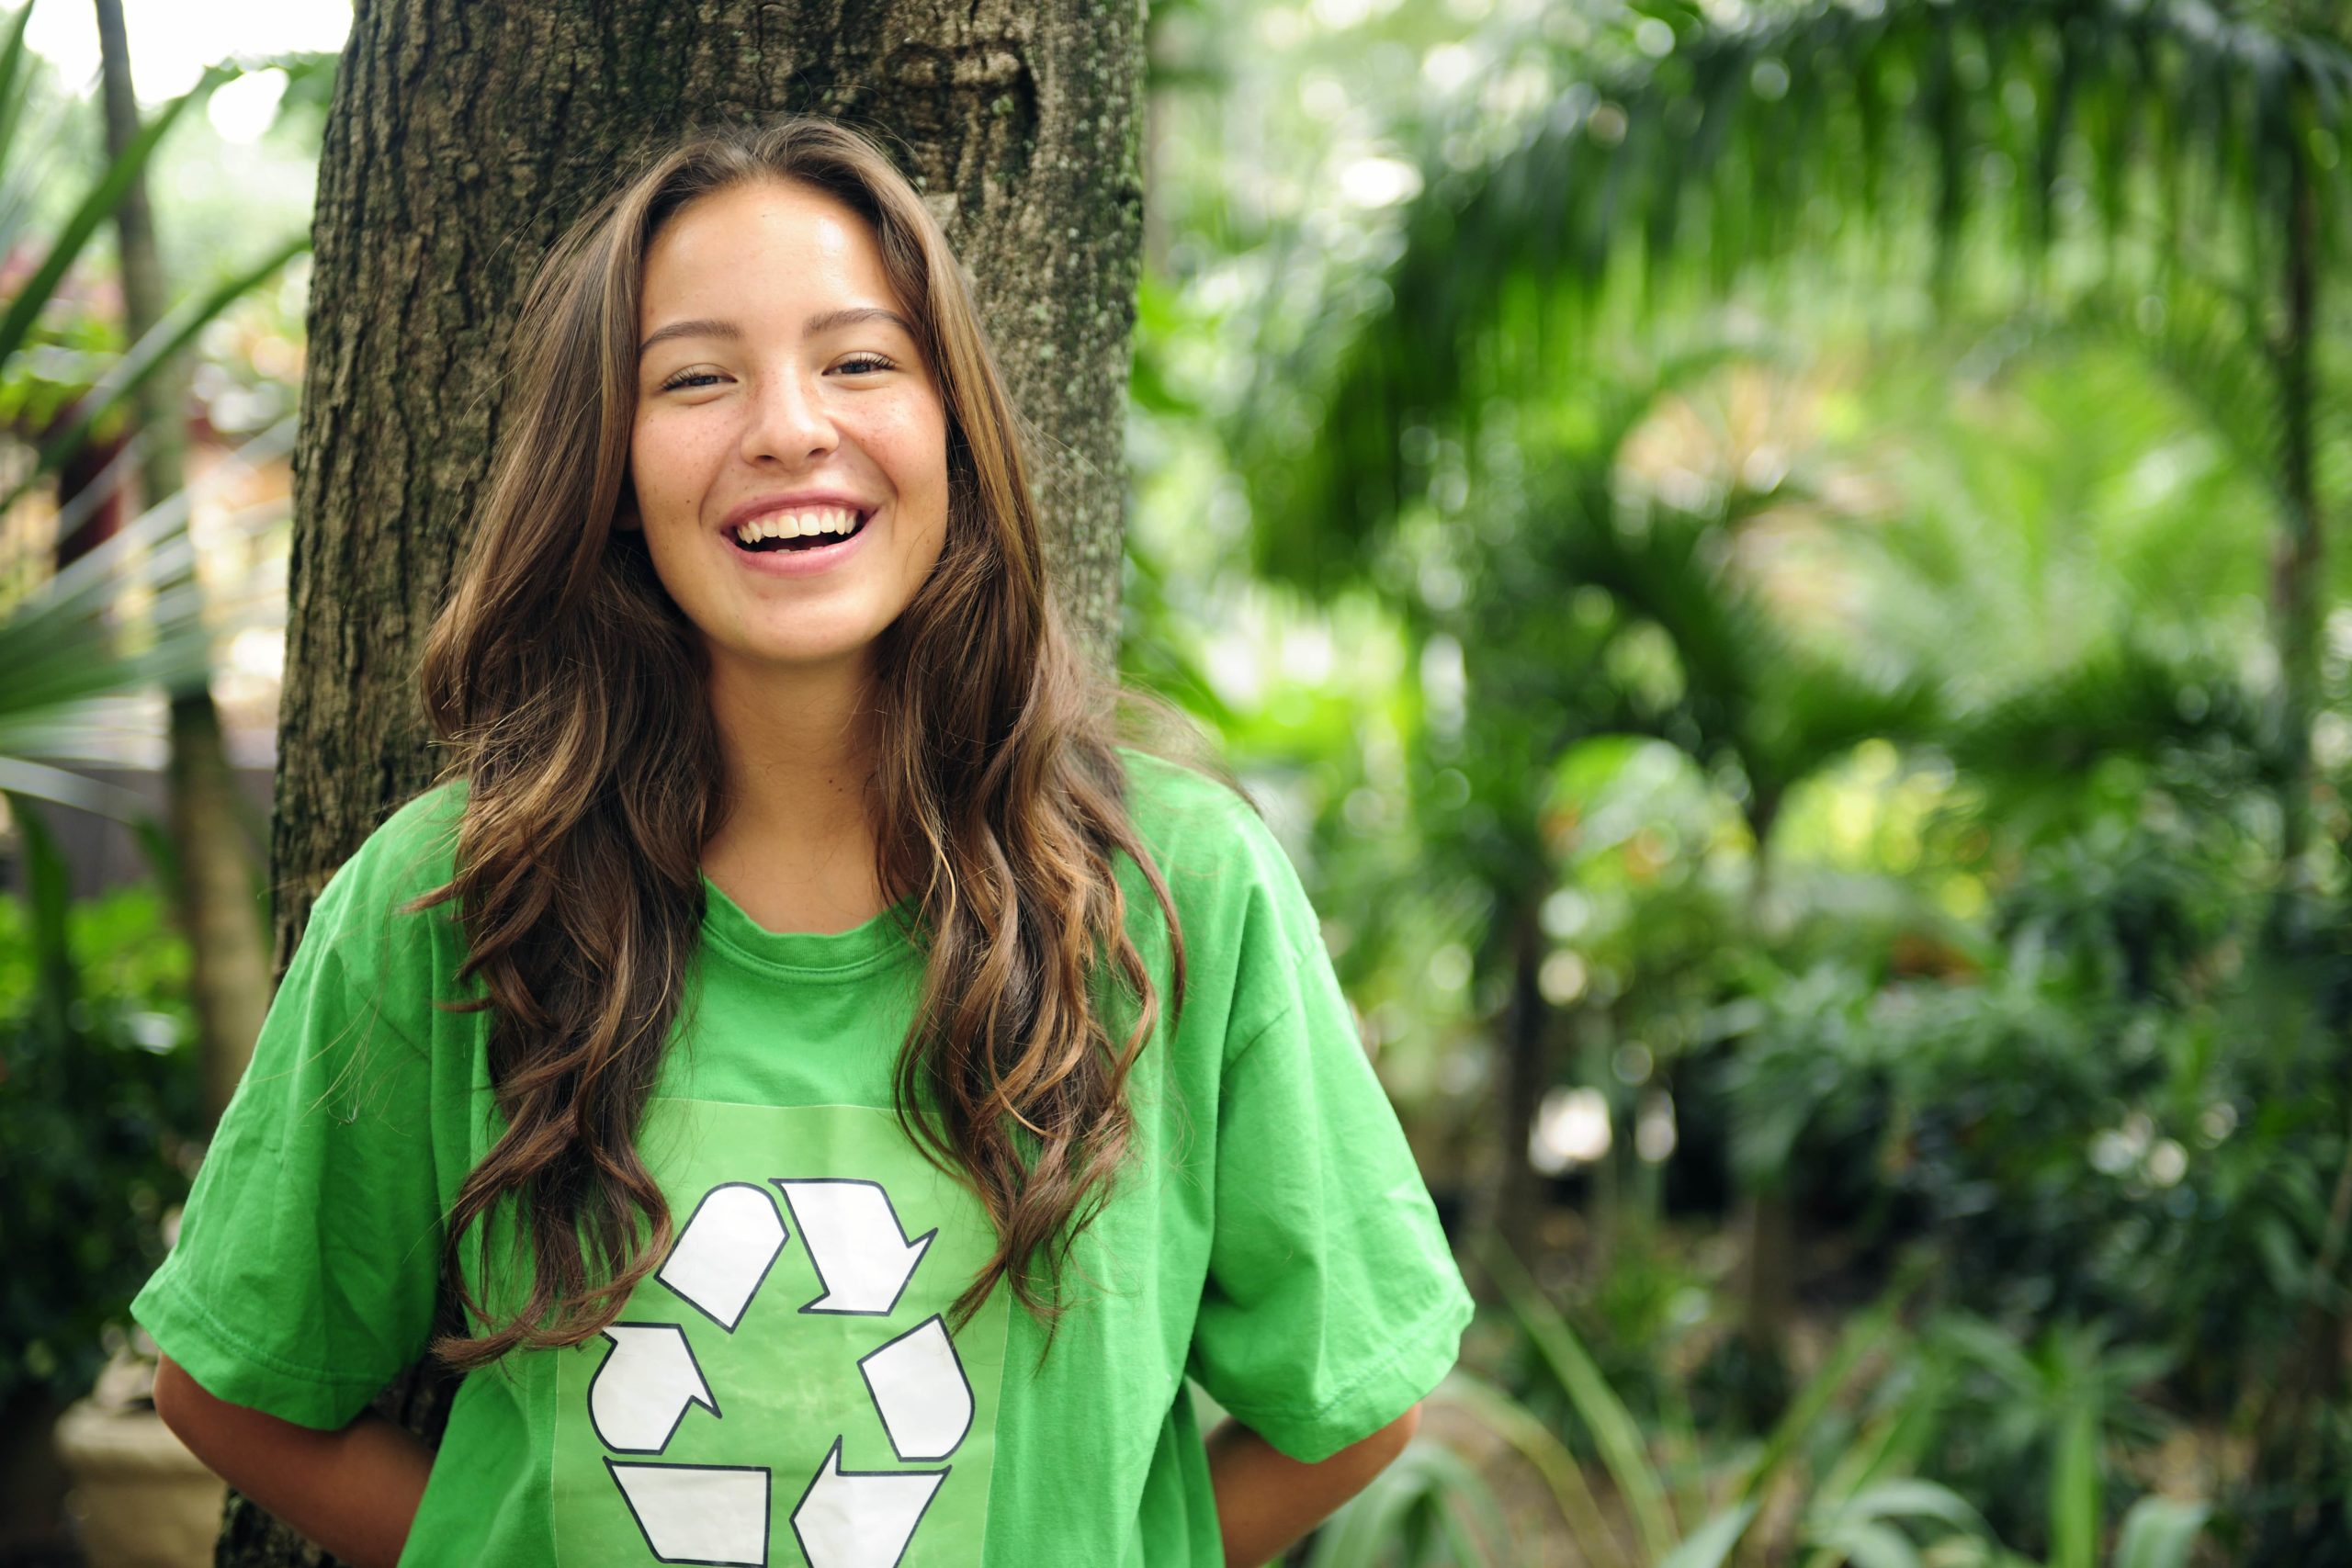 teen girl laughing in forest with green recycle shirt